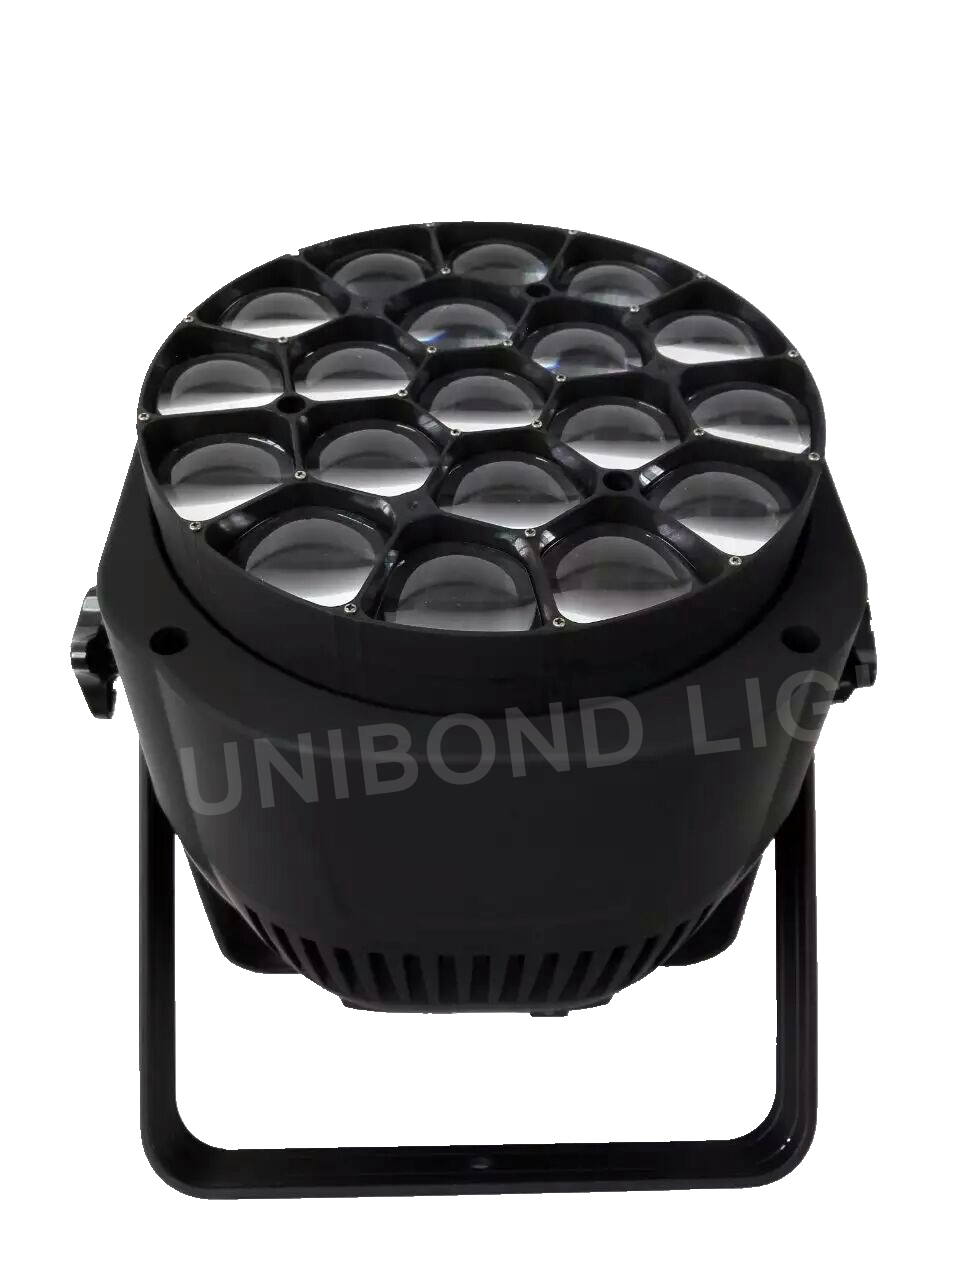 LED 19*15W RGBW 4 in 1 Beeye PAR Light with Zoom Stage Light Disco Light Party Light